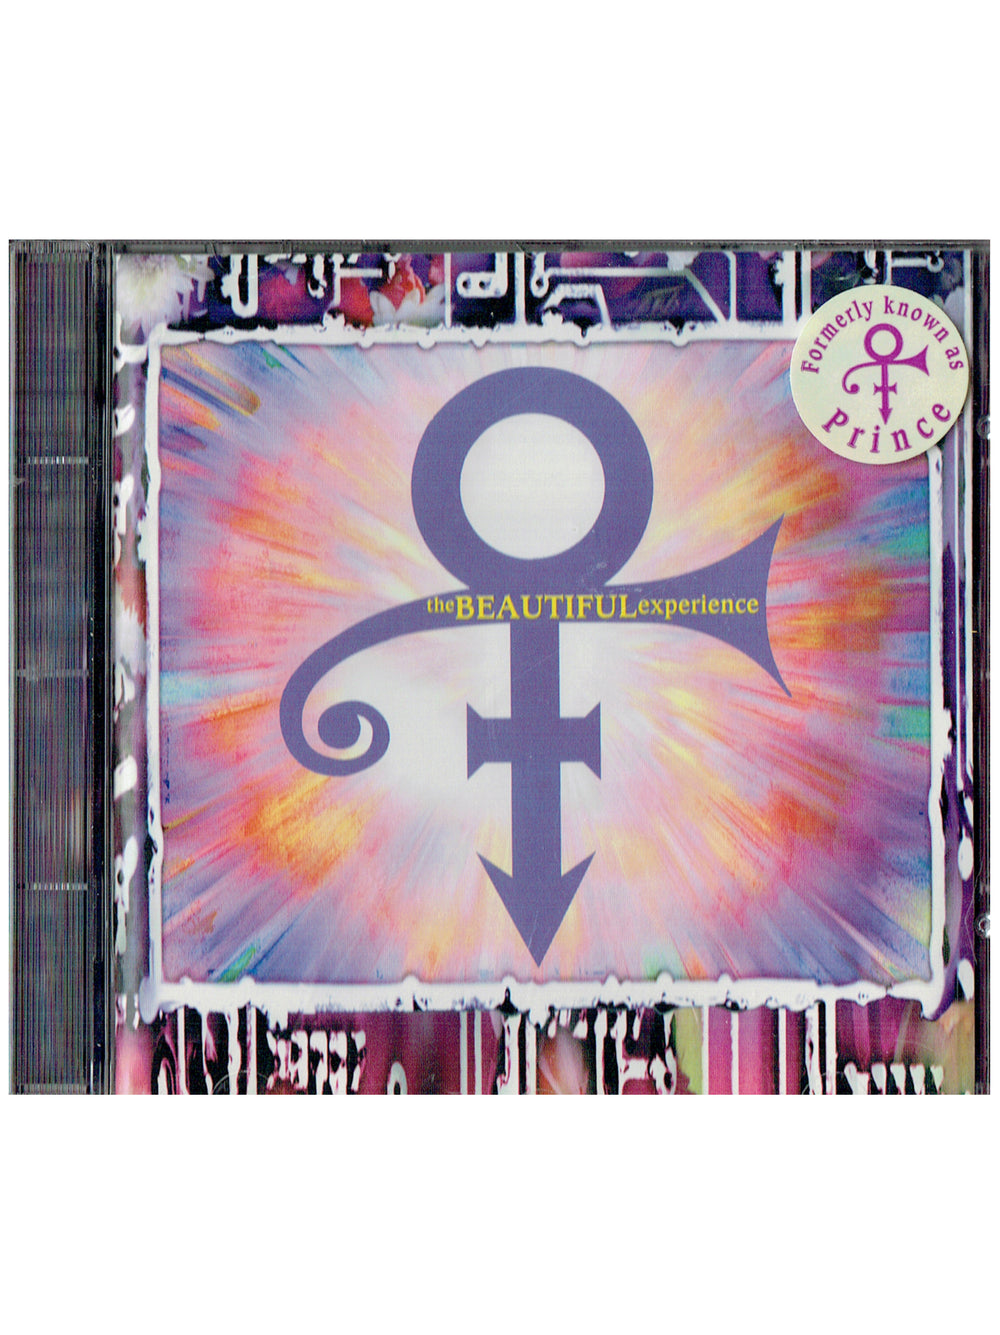 Prince – 0(+> The Beautiful Experience Hype & Butterfly Cut-Out CD EP UK Europe Preloved: 1994